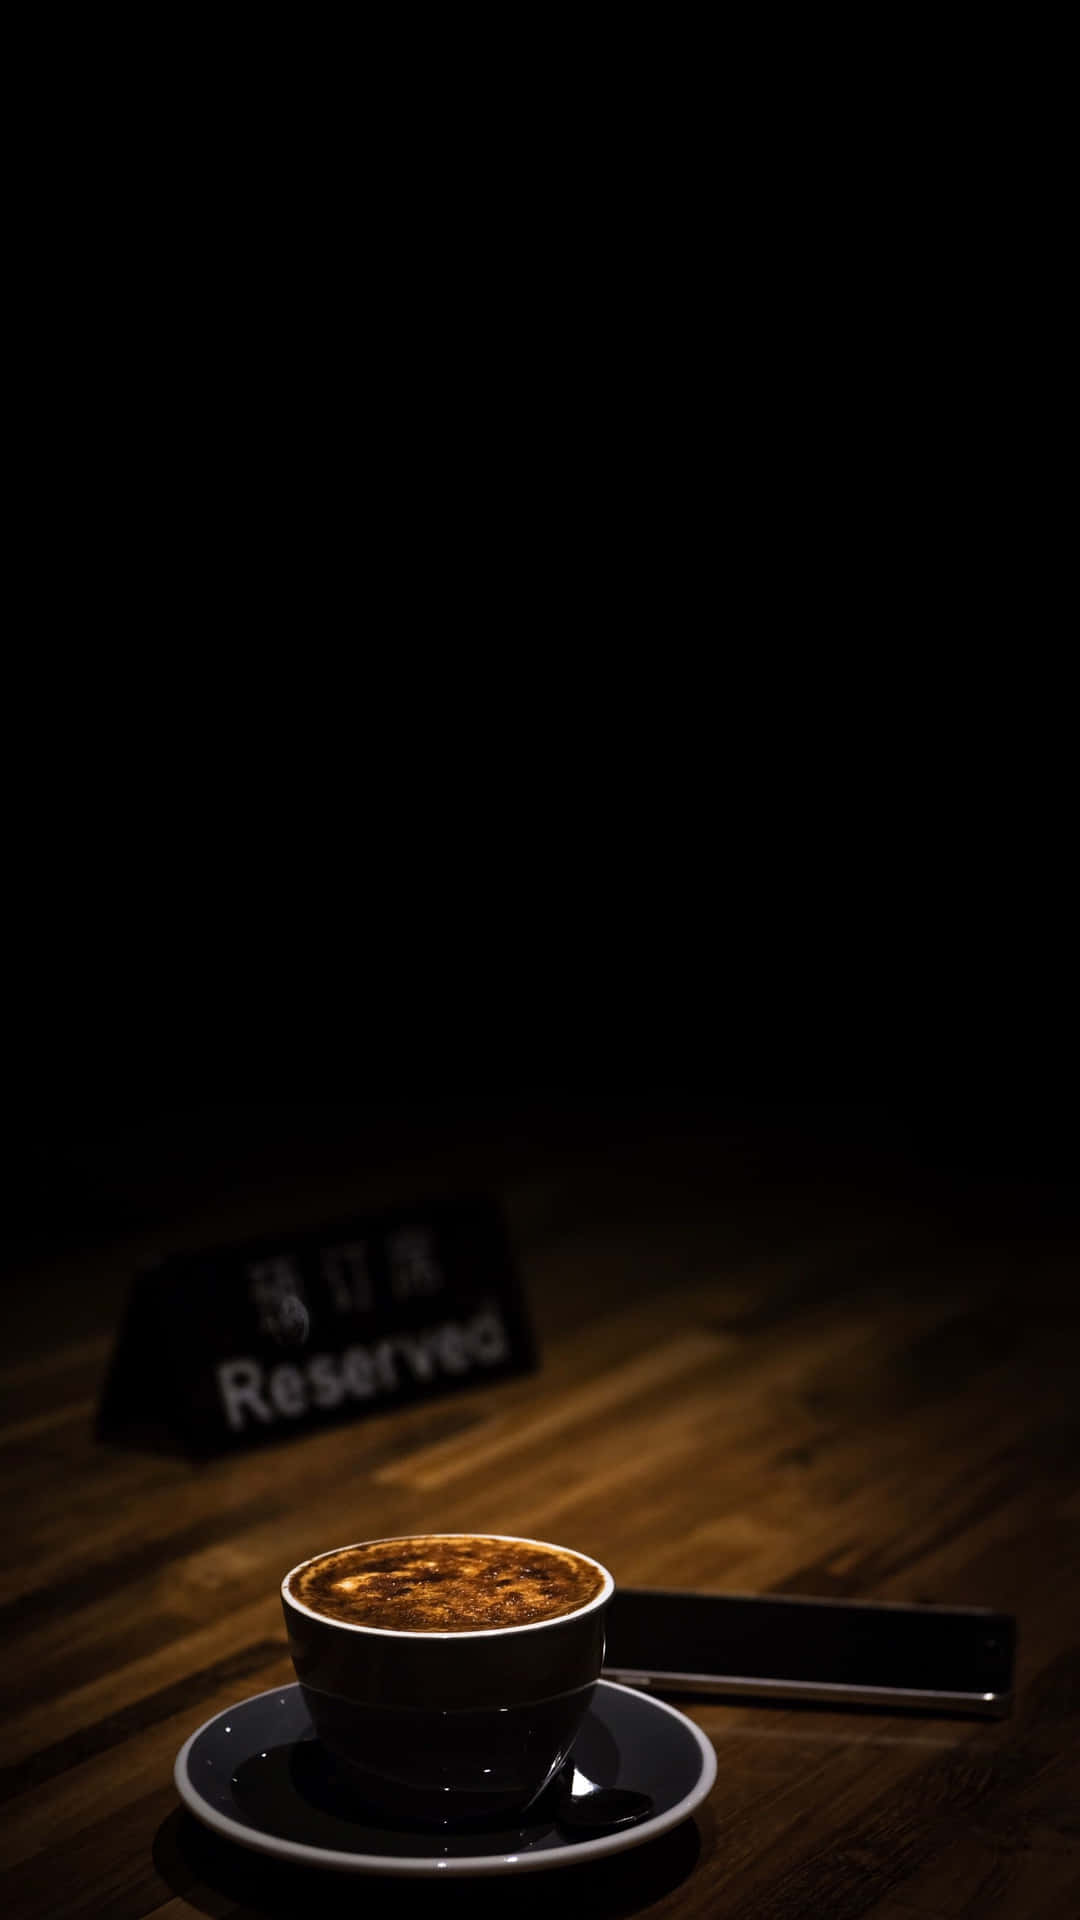 Reserved Sign on Table at Coffee Shop Wallpaper